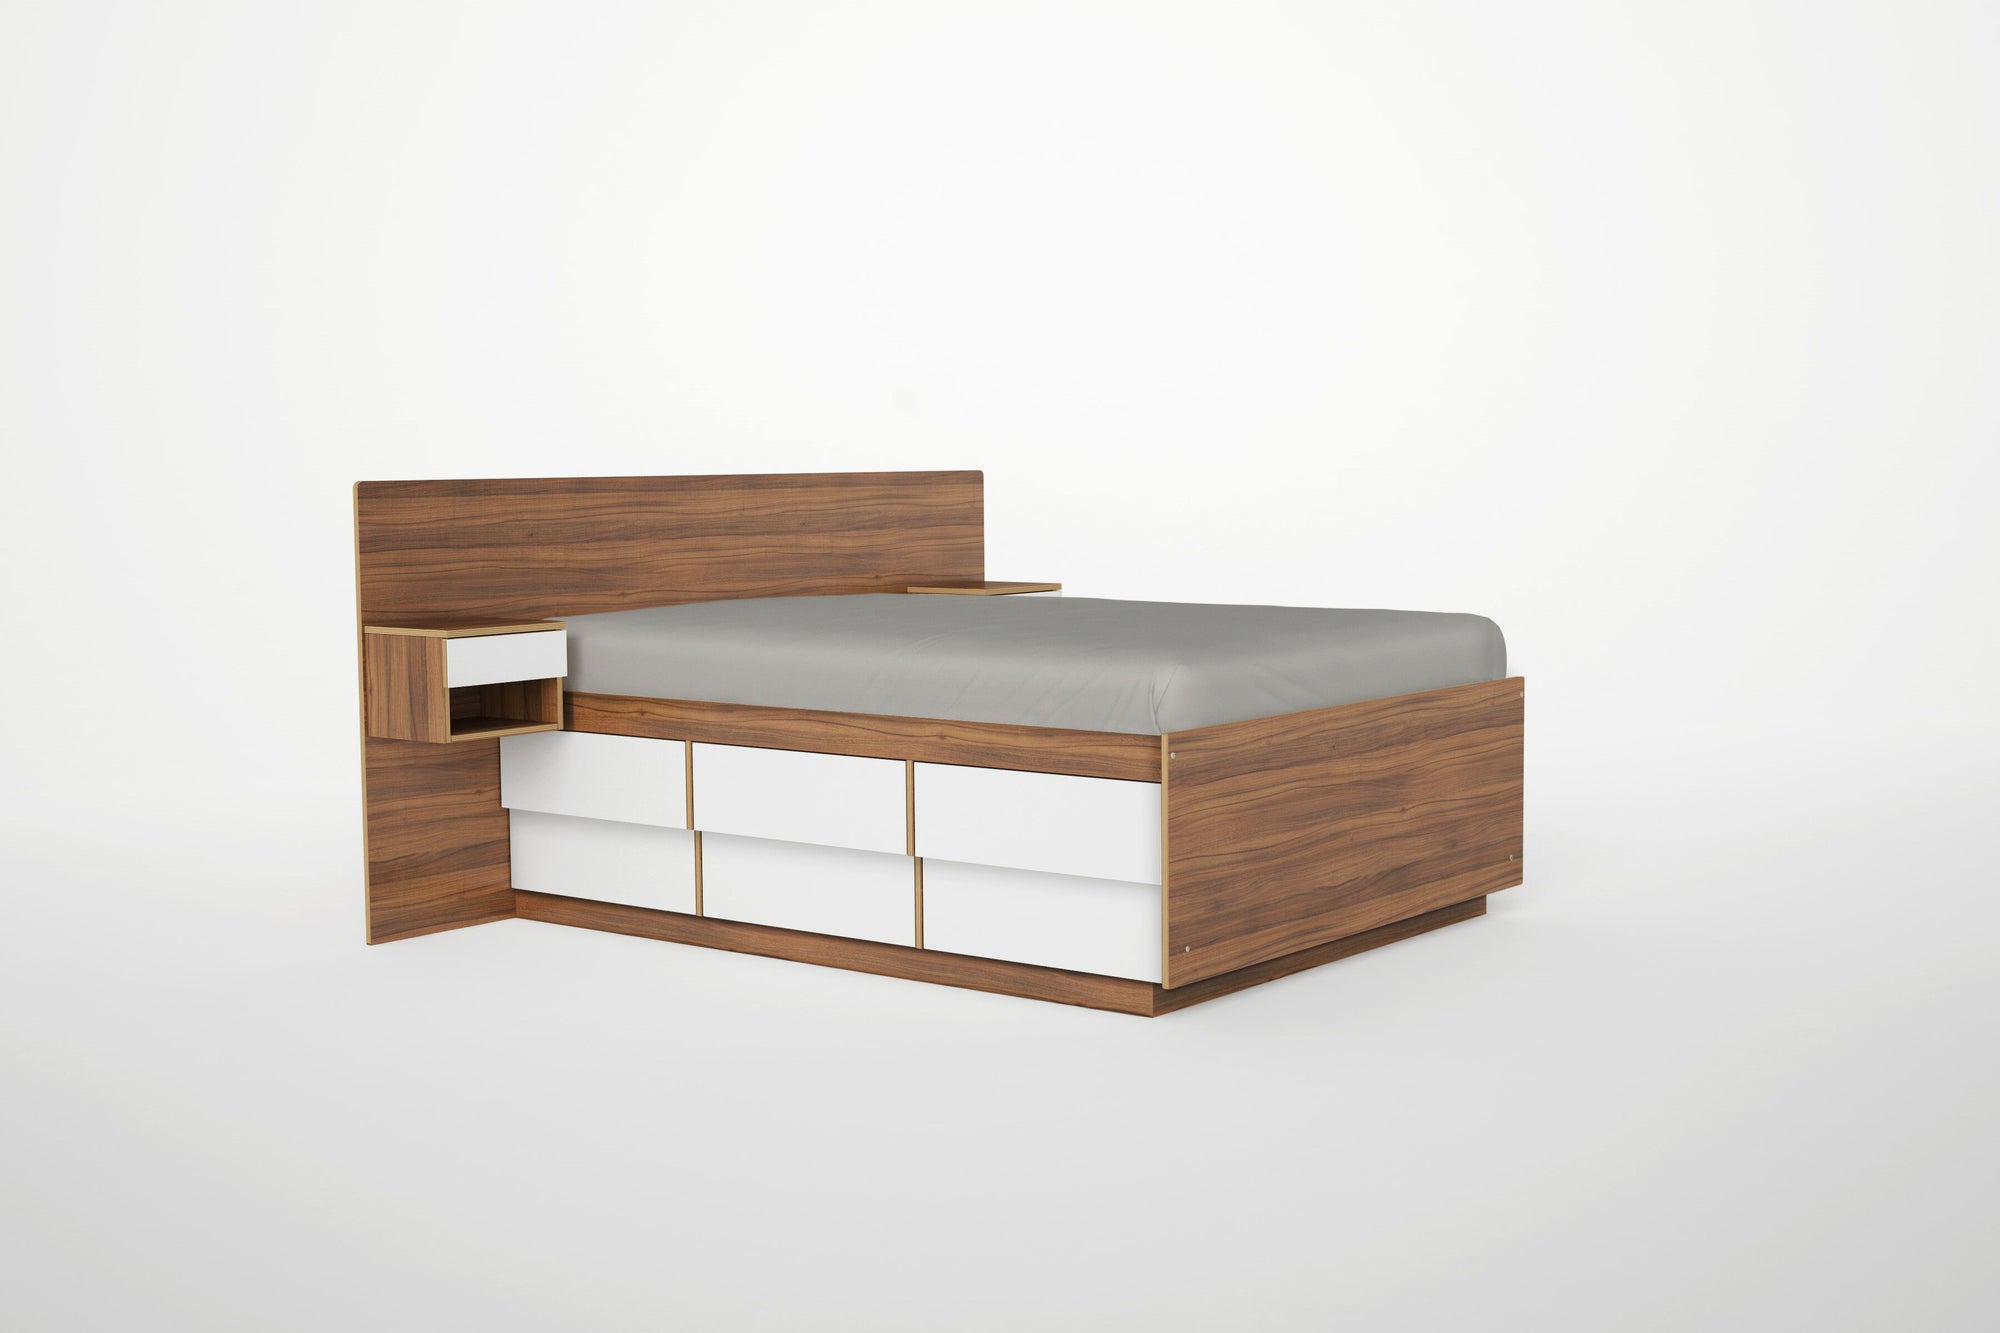 Wooden bed with headboard shelves and storage drawers on a white background.